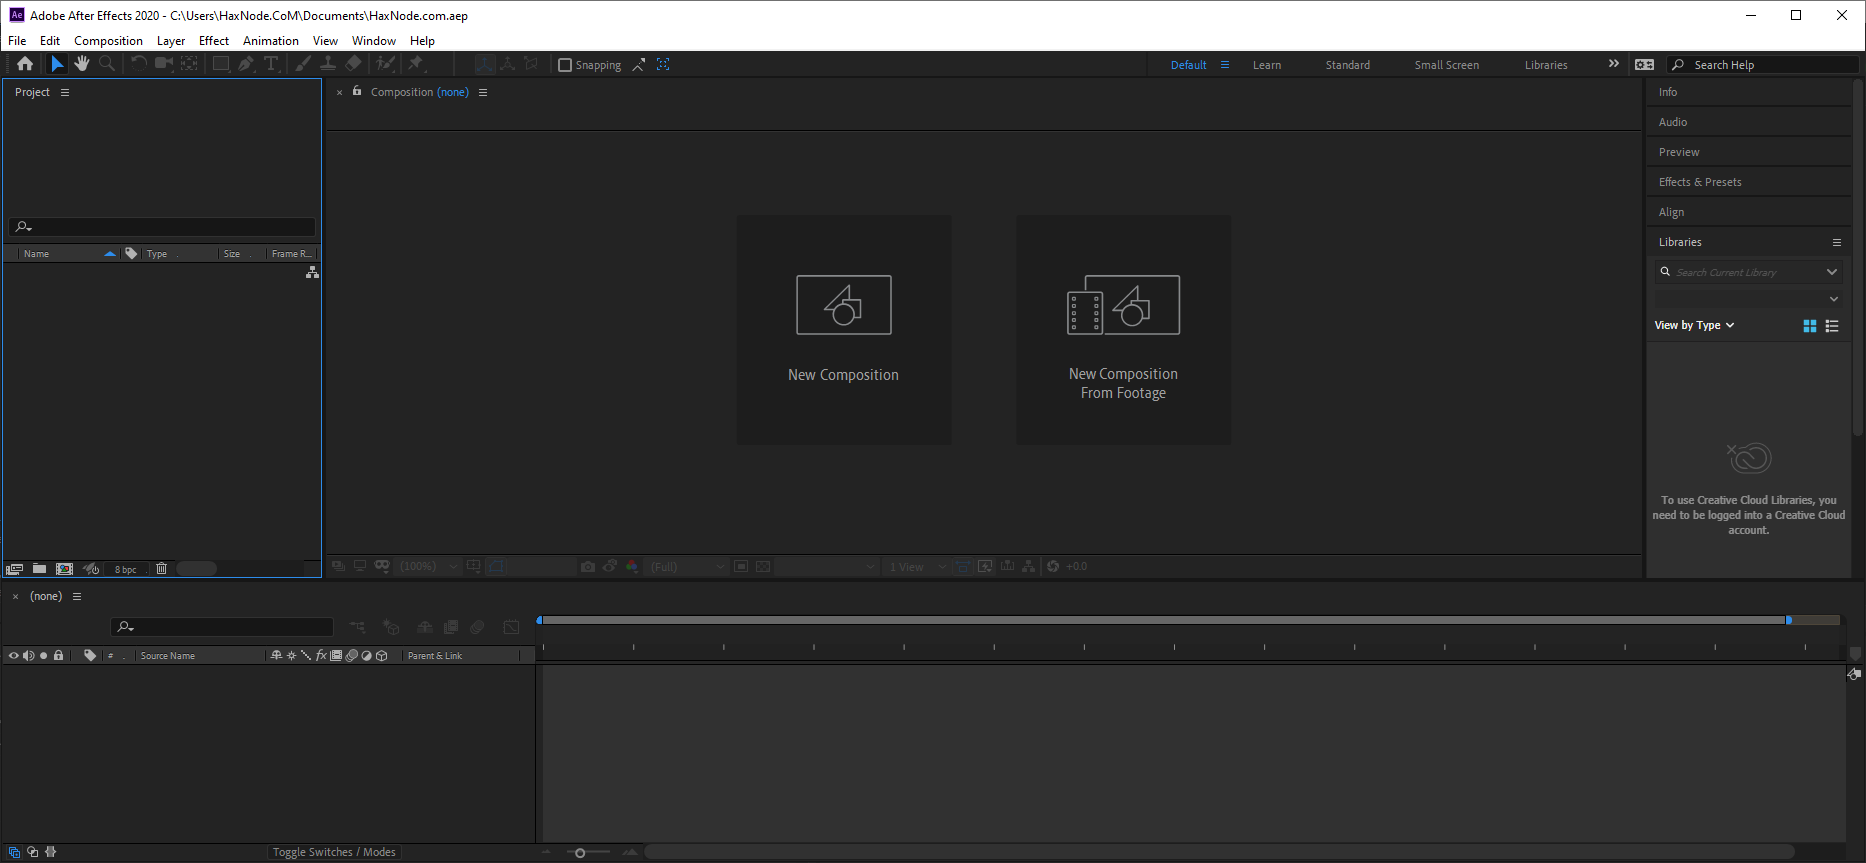 Adobe After Effects 2020 v17.0.3.58 (x64) Patched - [haxNode]